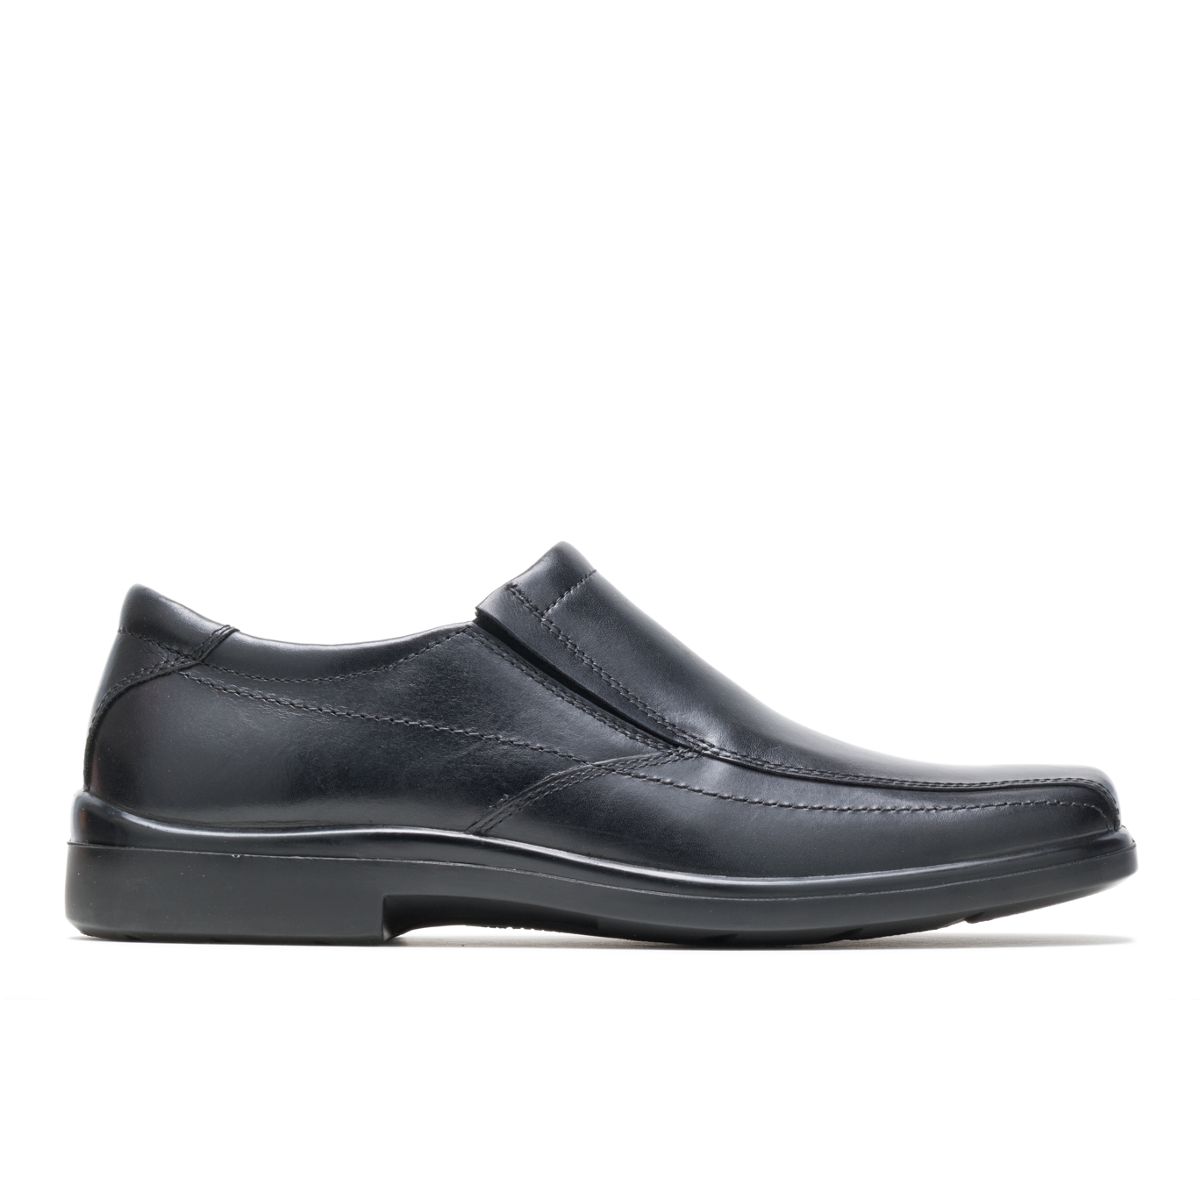 hush puppies slip on formal shoes